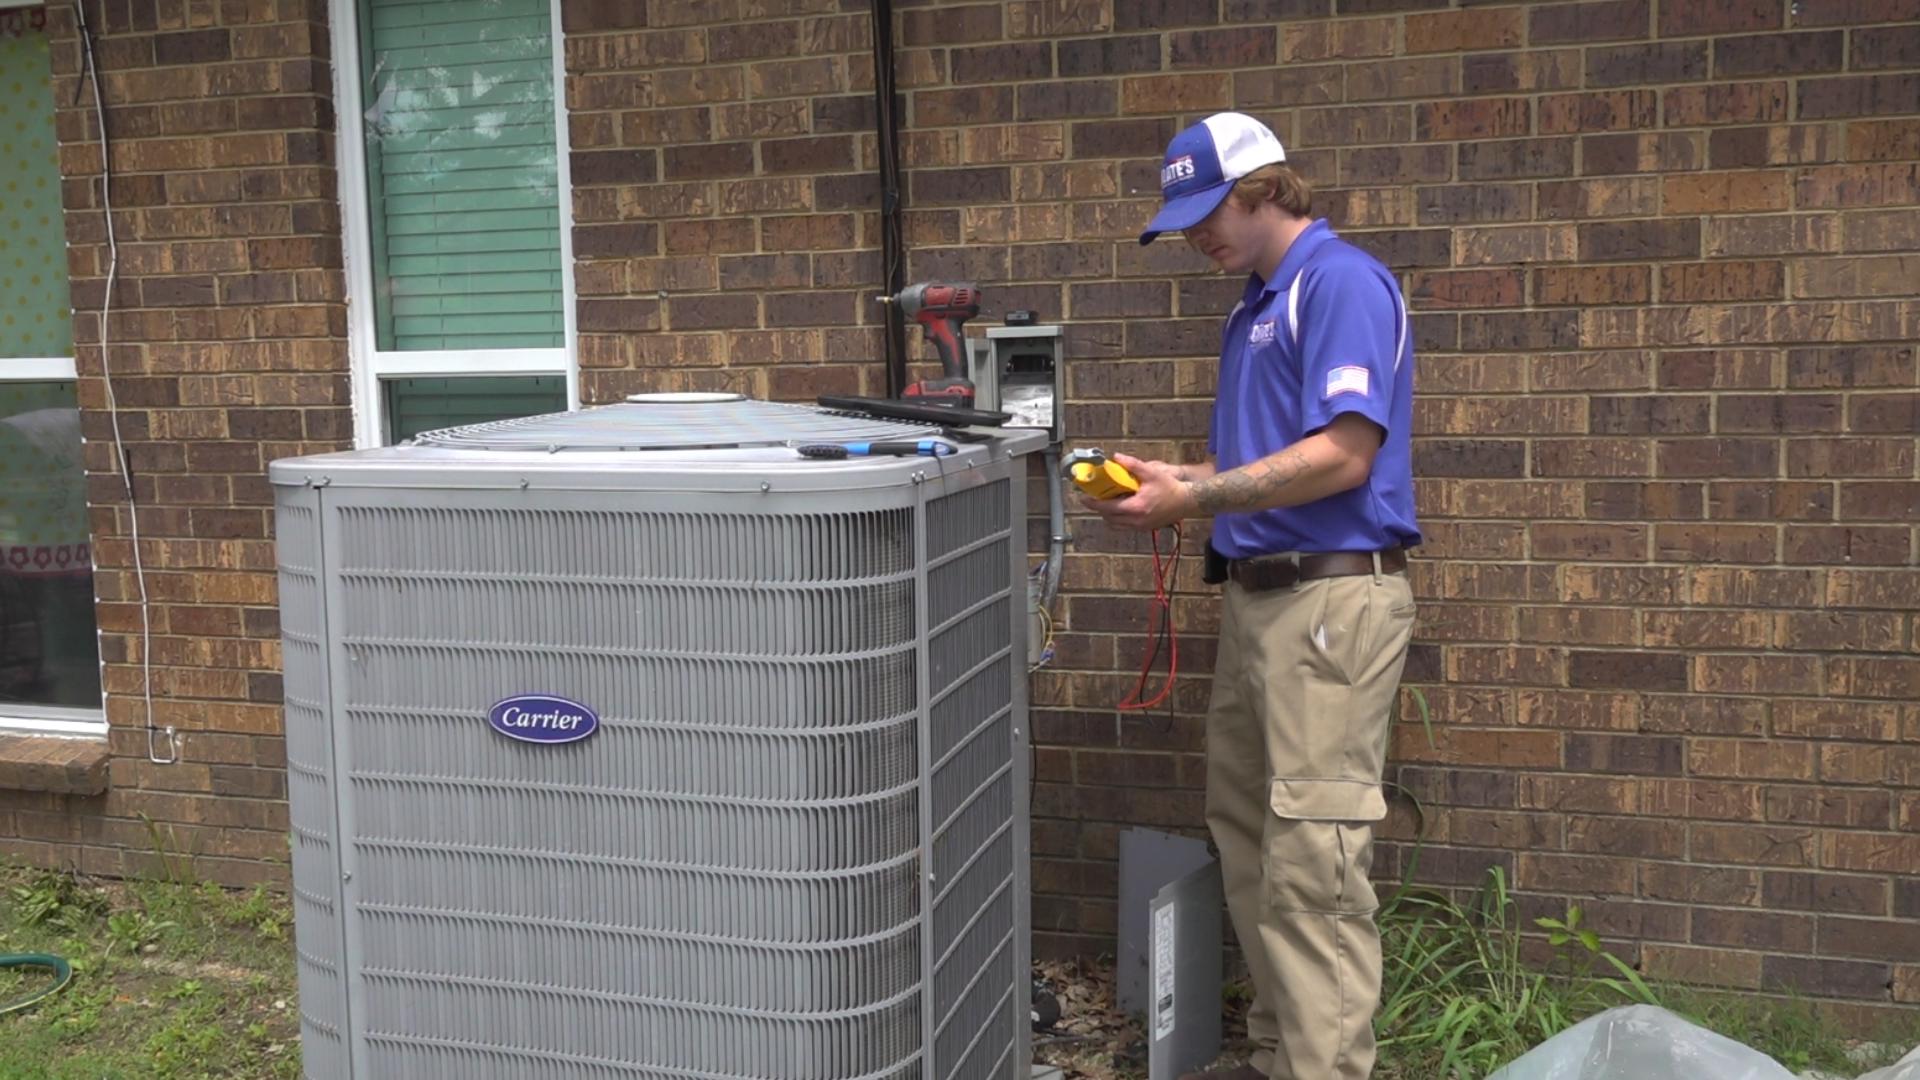 A Memphis HVAC repair company said now is the time to begin checking your air conditioners and preparing them as temperatures begin to rise.